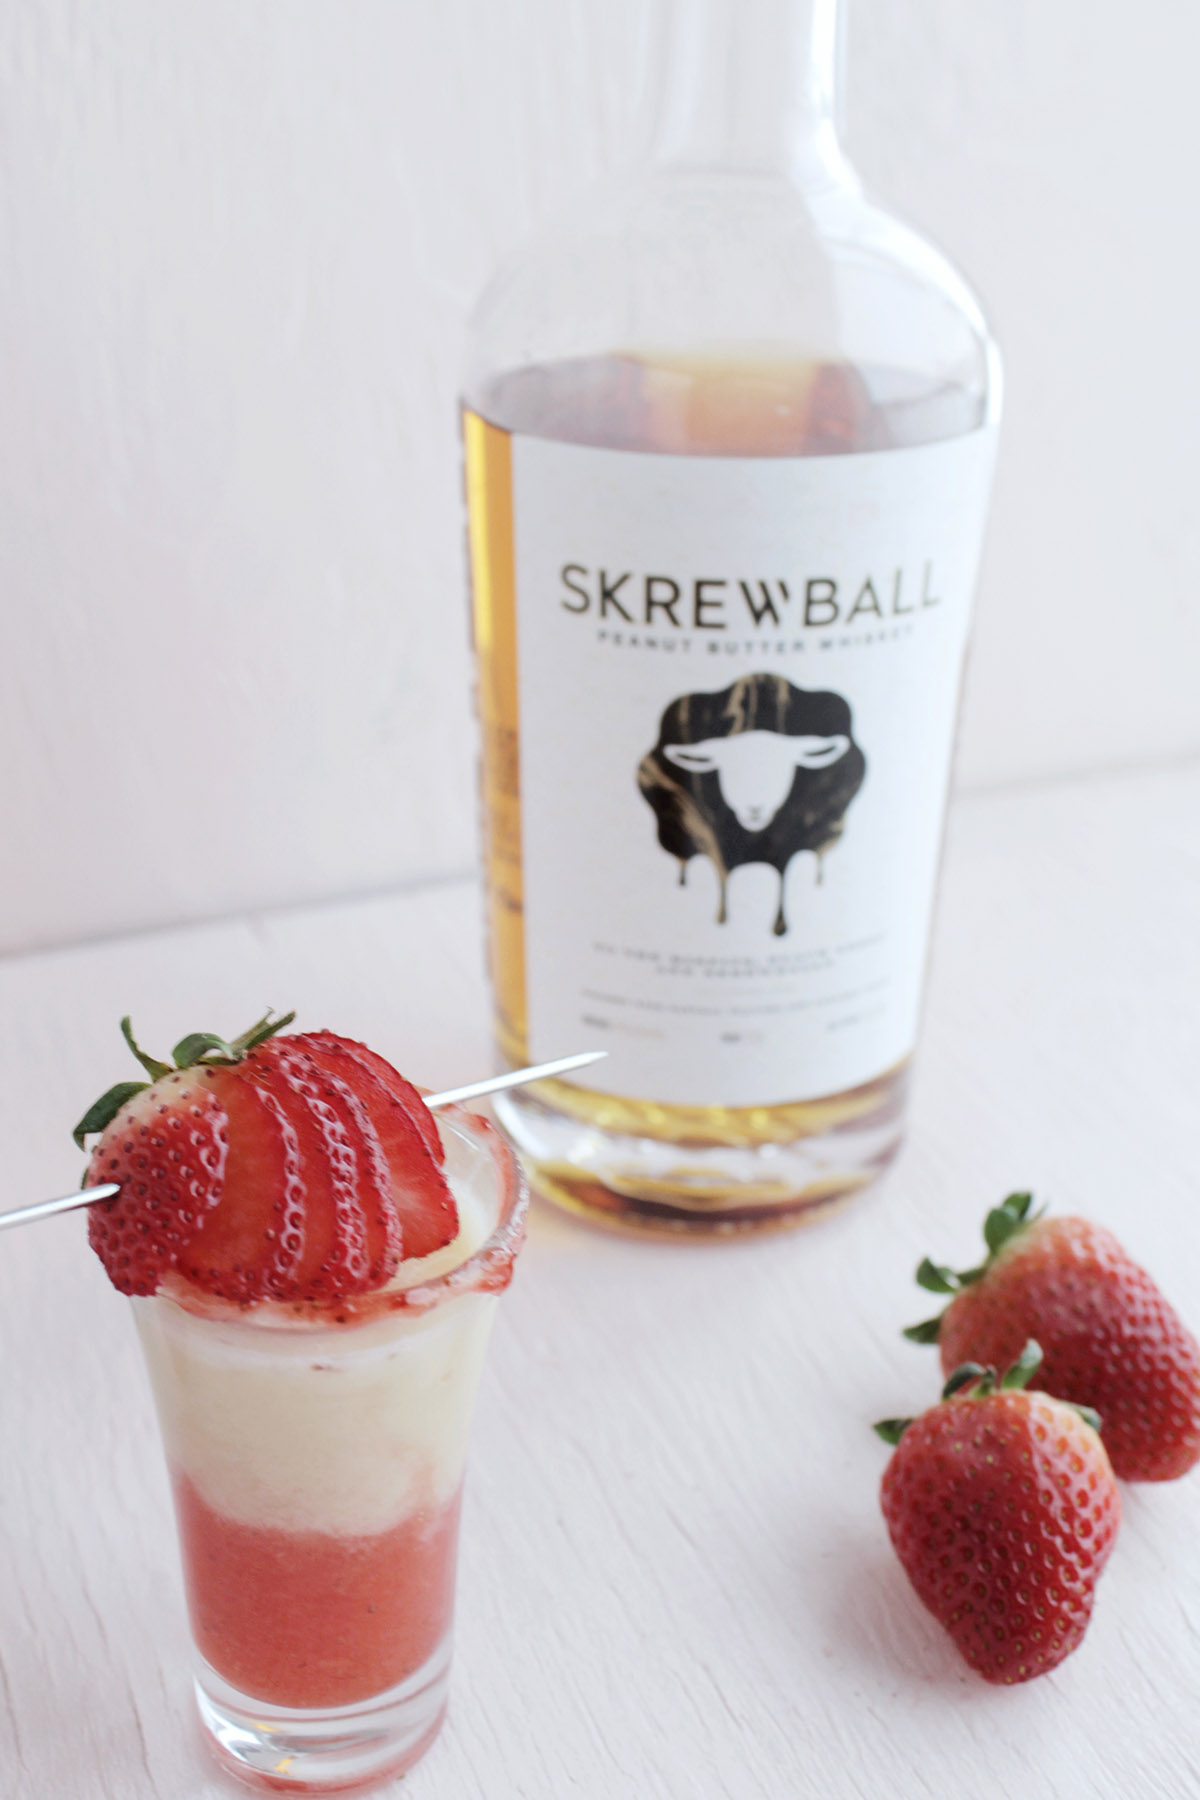 layered shot with strawberry and peanut butter whiskey.